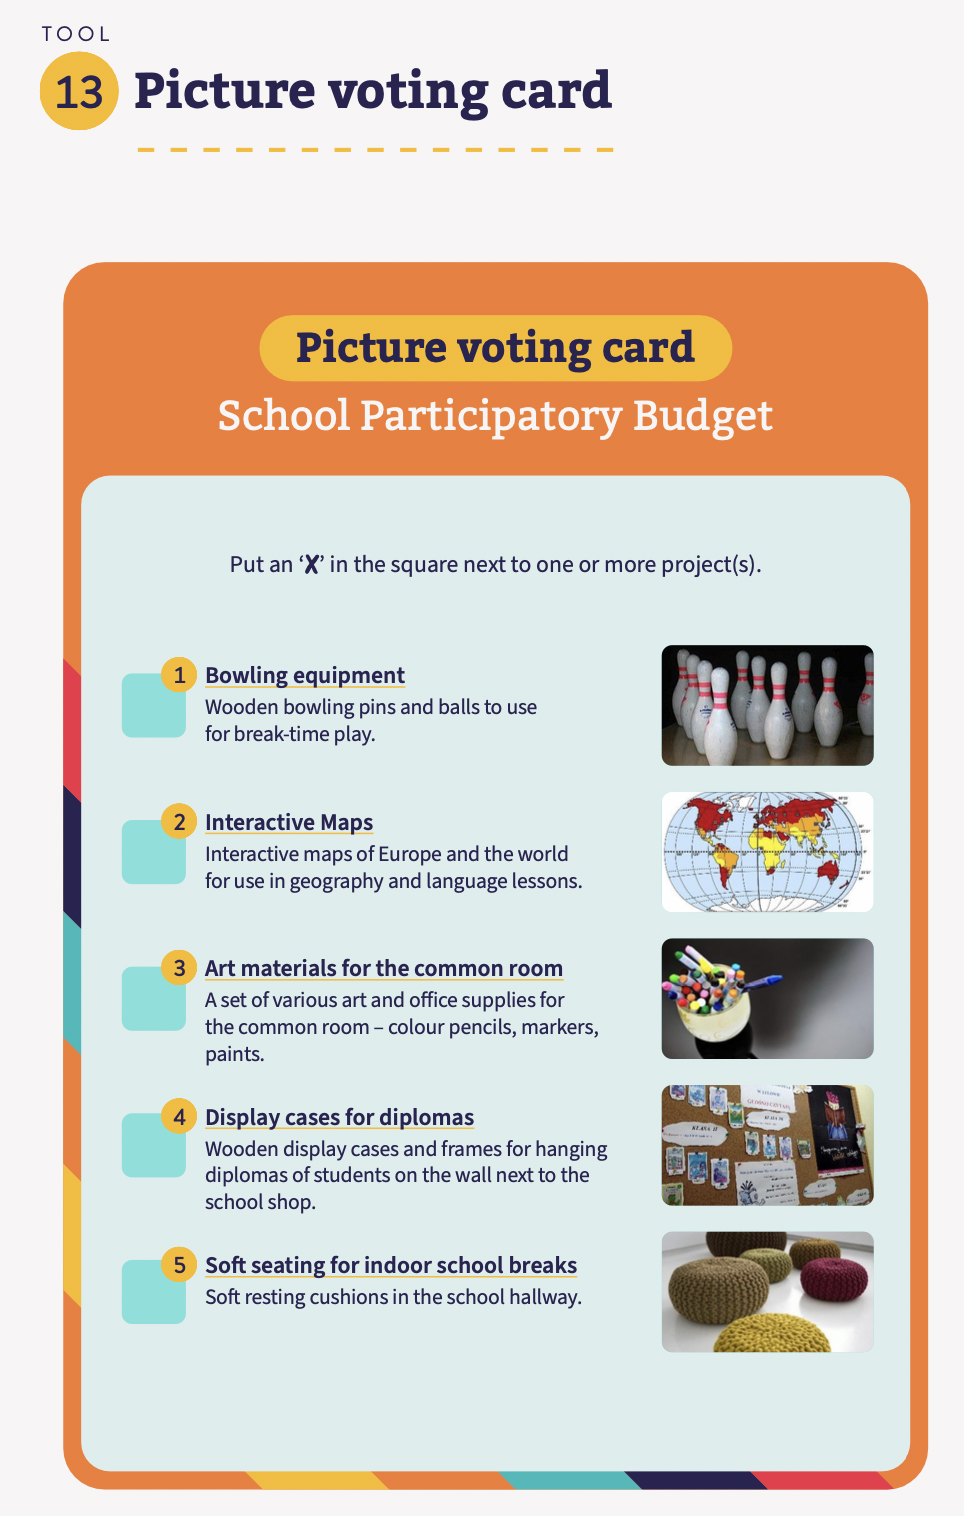 Tool 13: Picture voting card